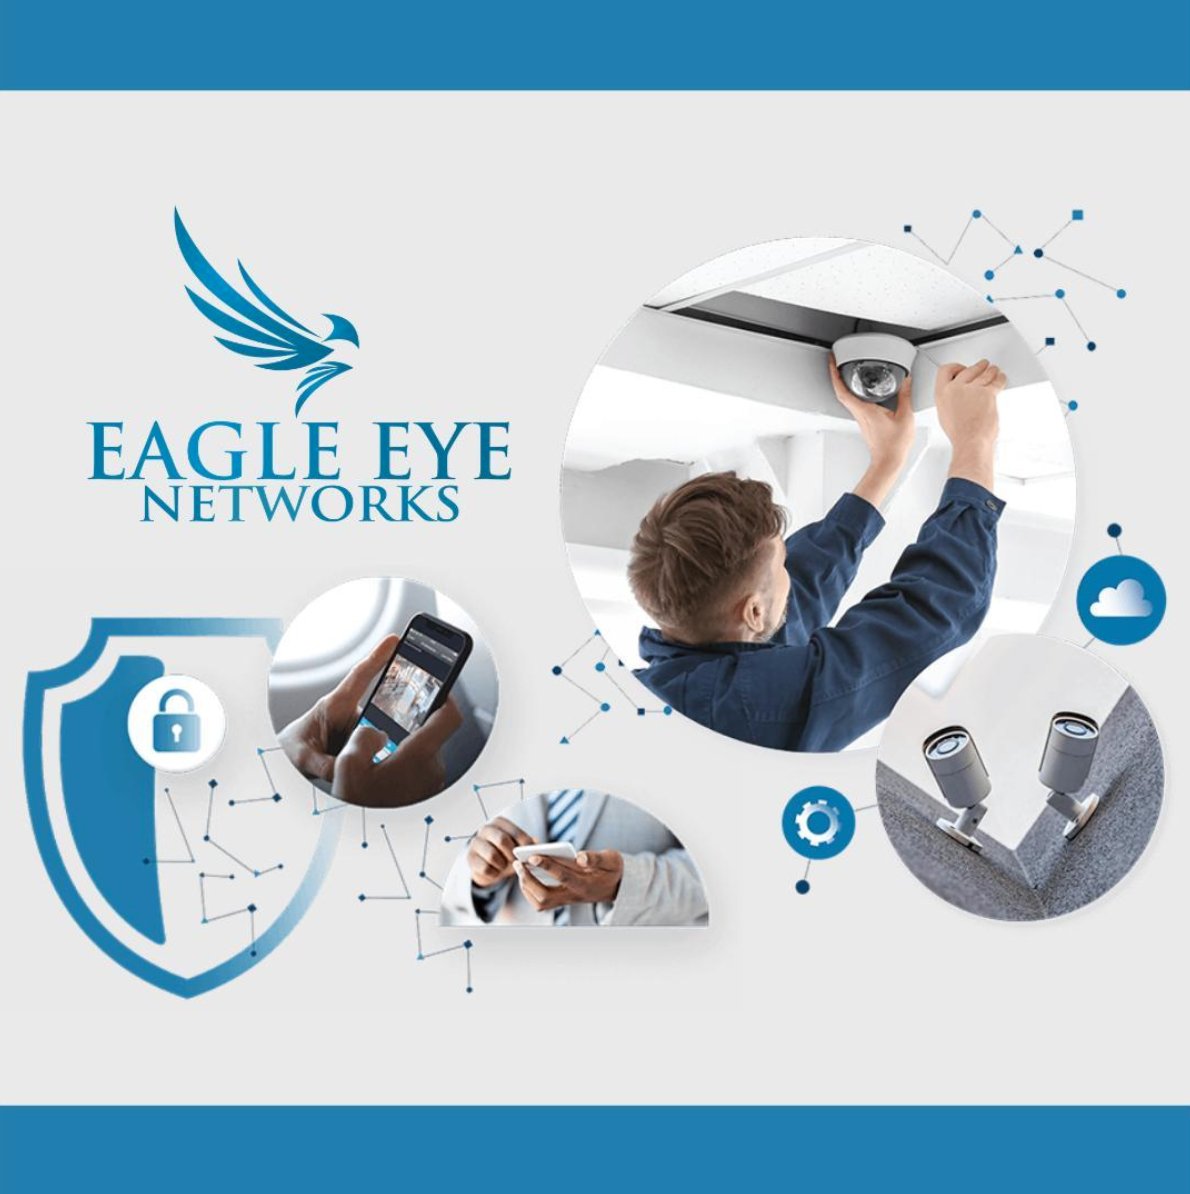 We are proud to partner with #EagleEyeNetworks to deliver a #CloudBased Video Surveillance Solution that gives our customers the best security, features, & capabilities.

#CloudSecurity #AccessControl #SecurityCompany #SurveillanceSystem #VideoSurveillance #MobileSecurity